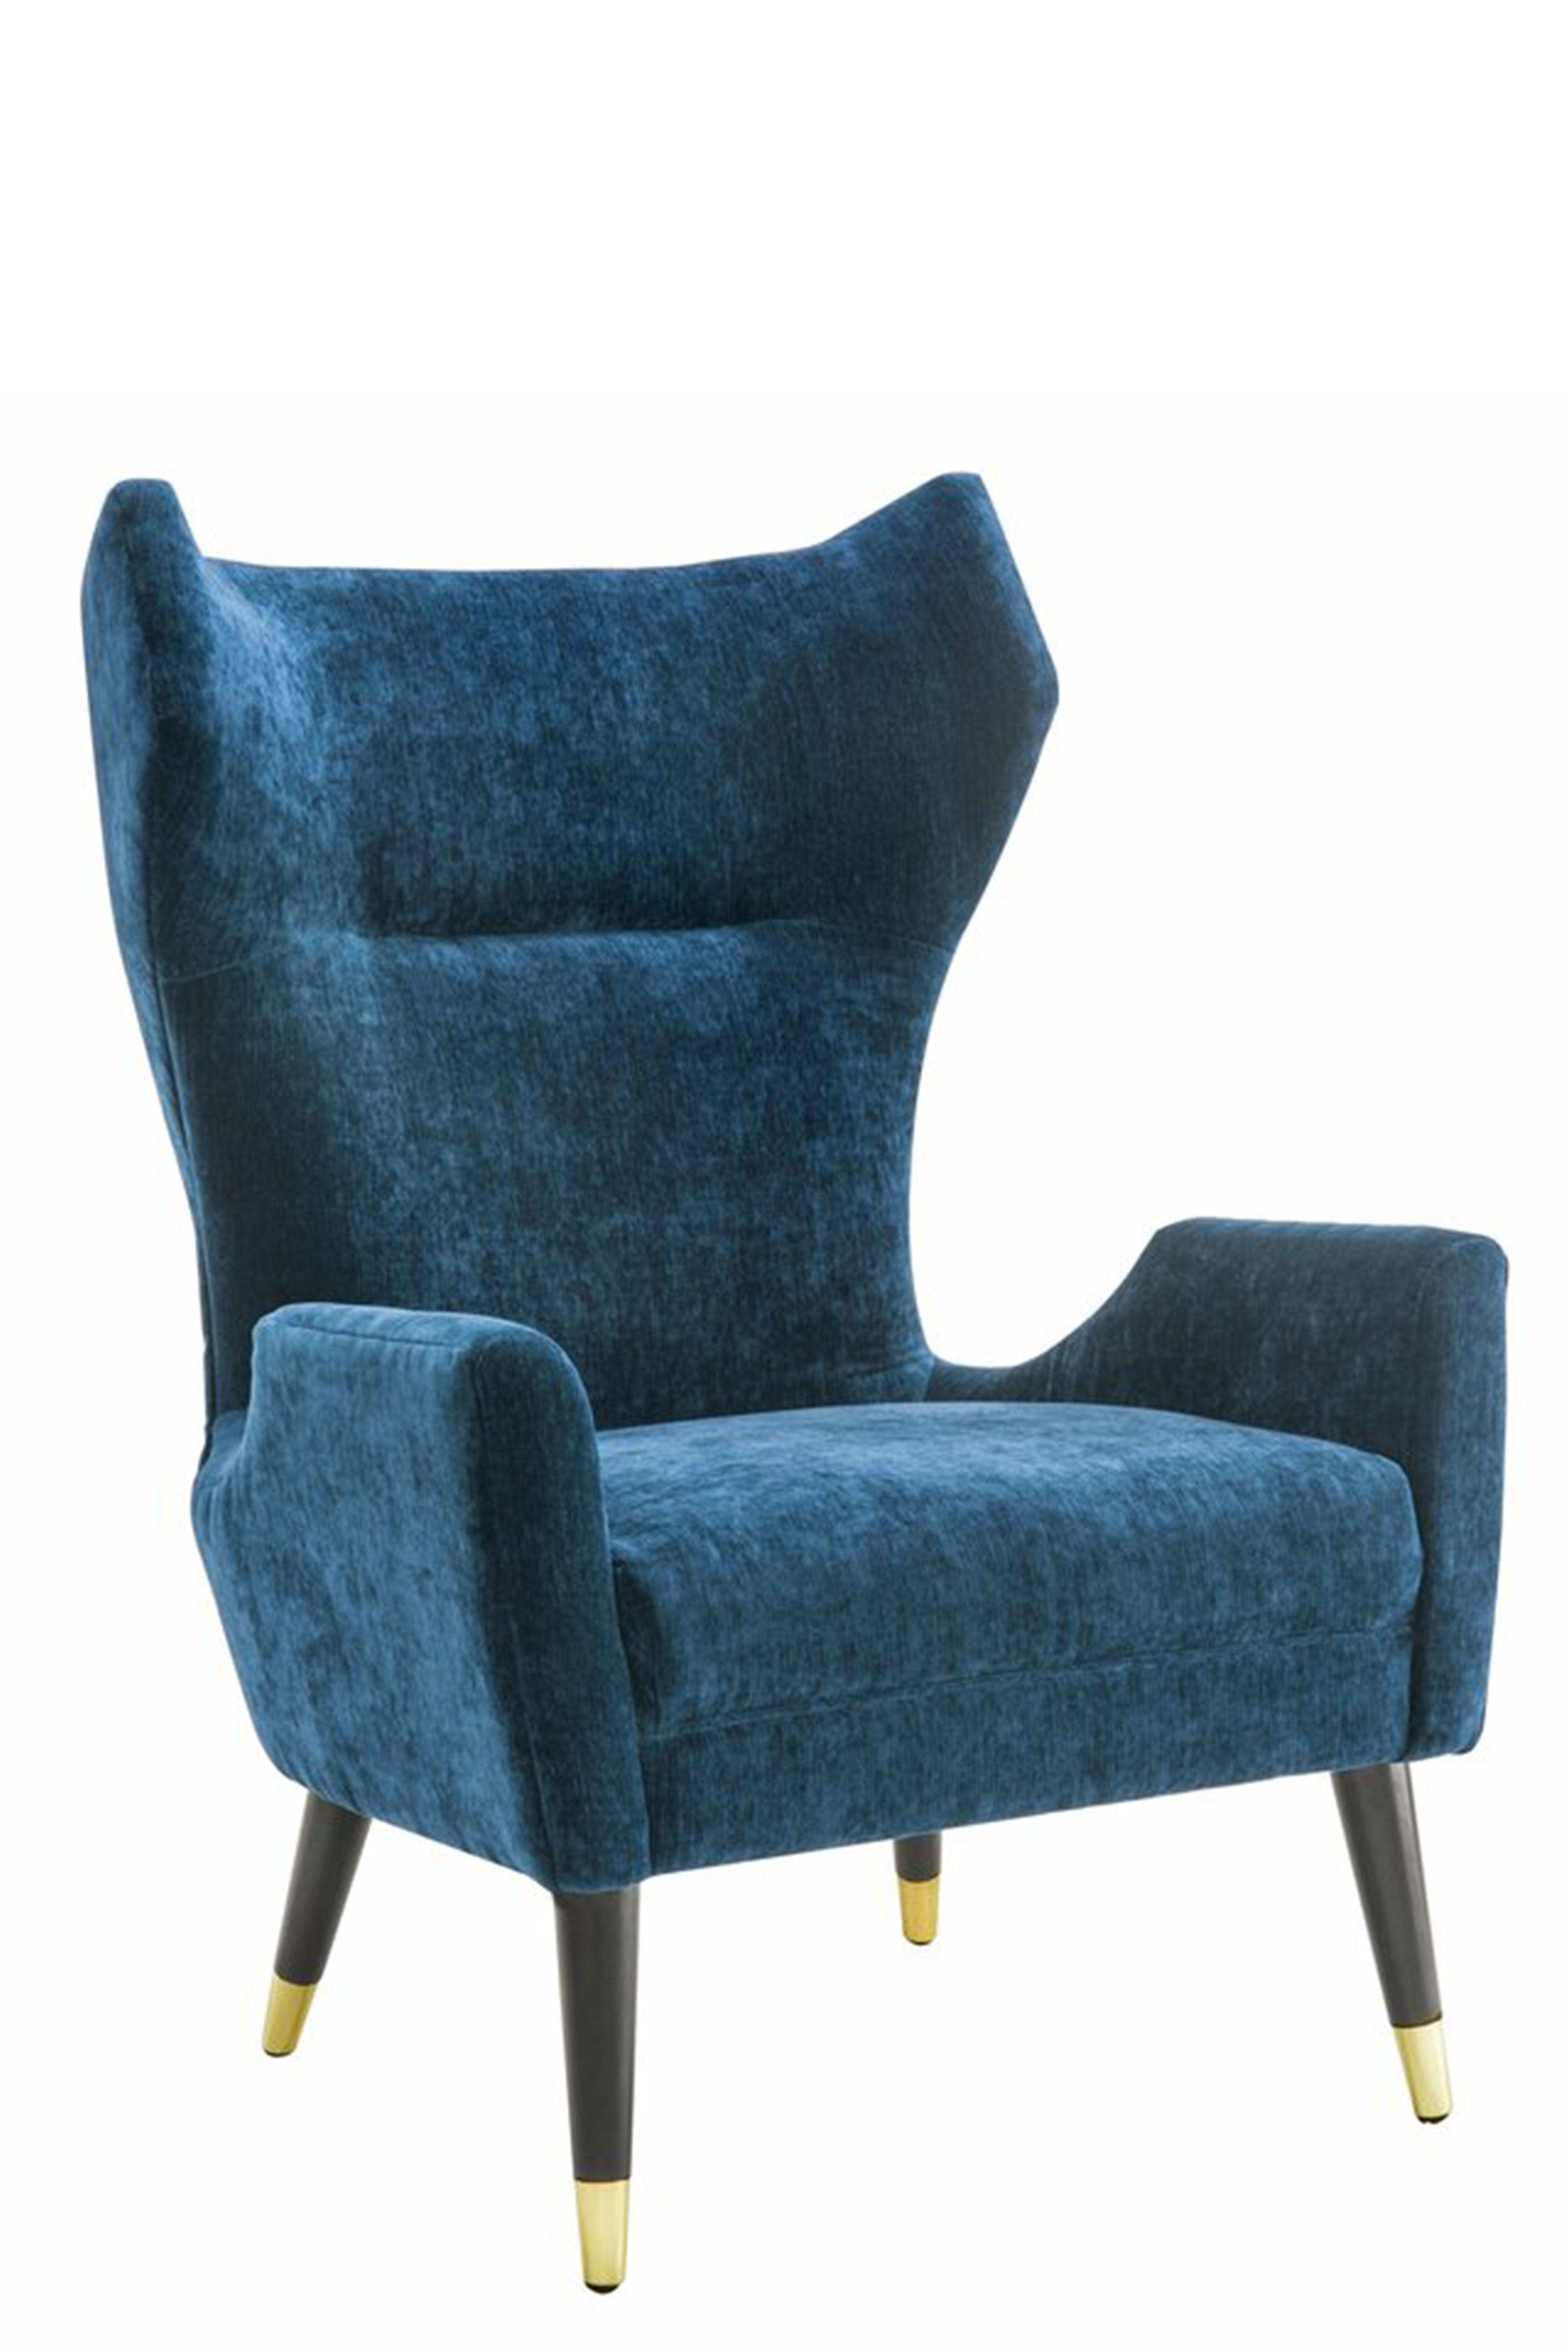 Uttermost Accent Furniture - Accent Chairs Clay Transitional Den Room  Armchair   Furniture Superstore - Rochester, MN   Upholstered Chairs